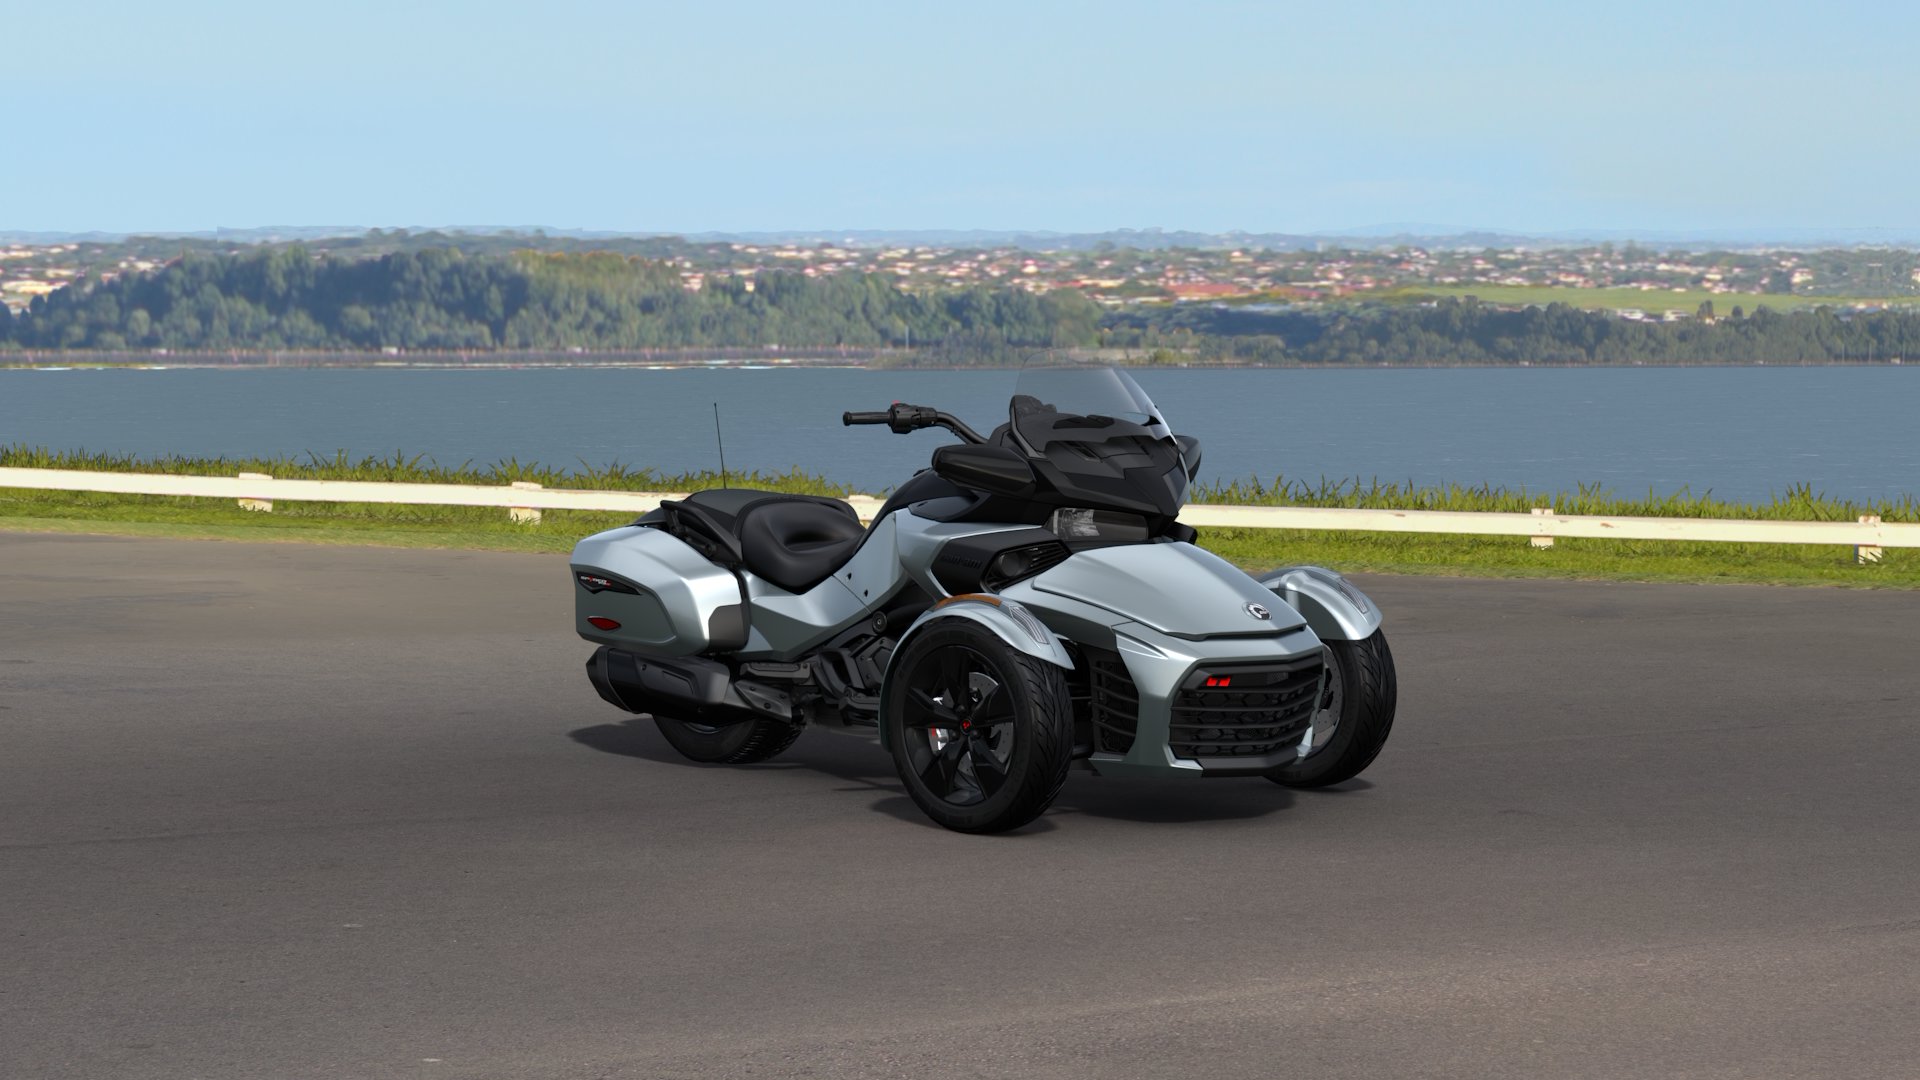 2022 Can-Am Spyder F3-T [Specs, Features, Photos]